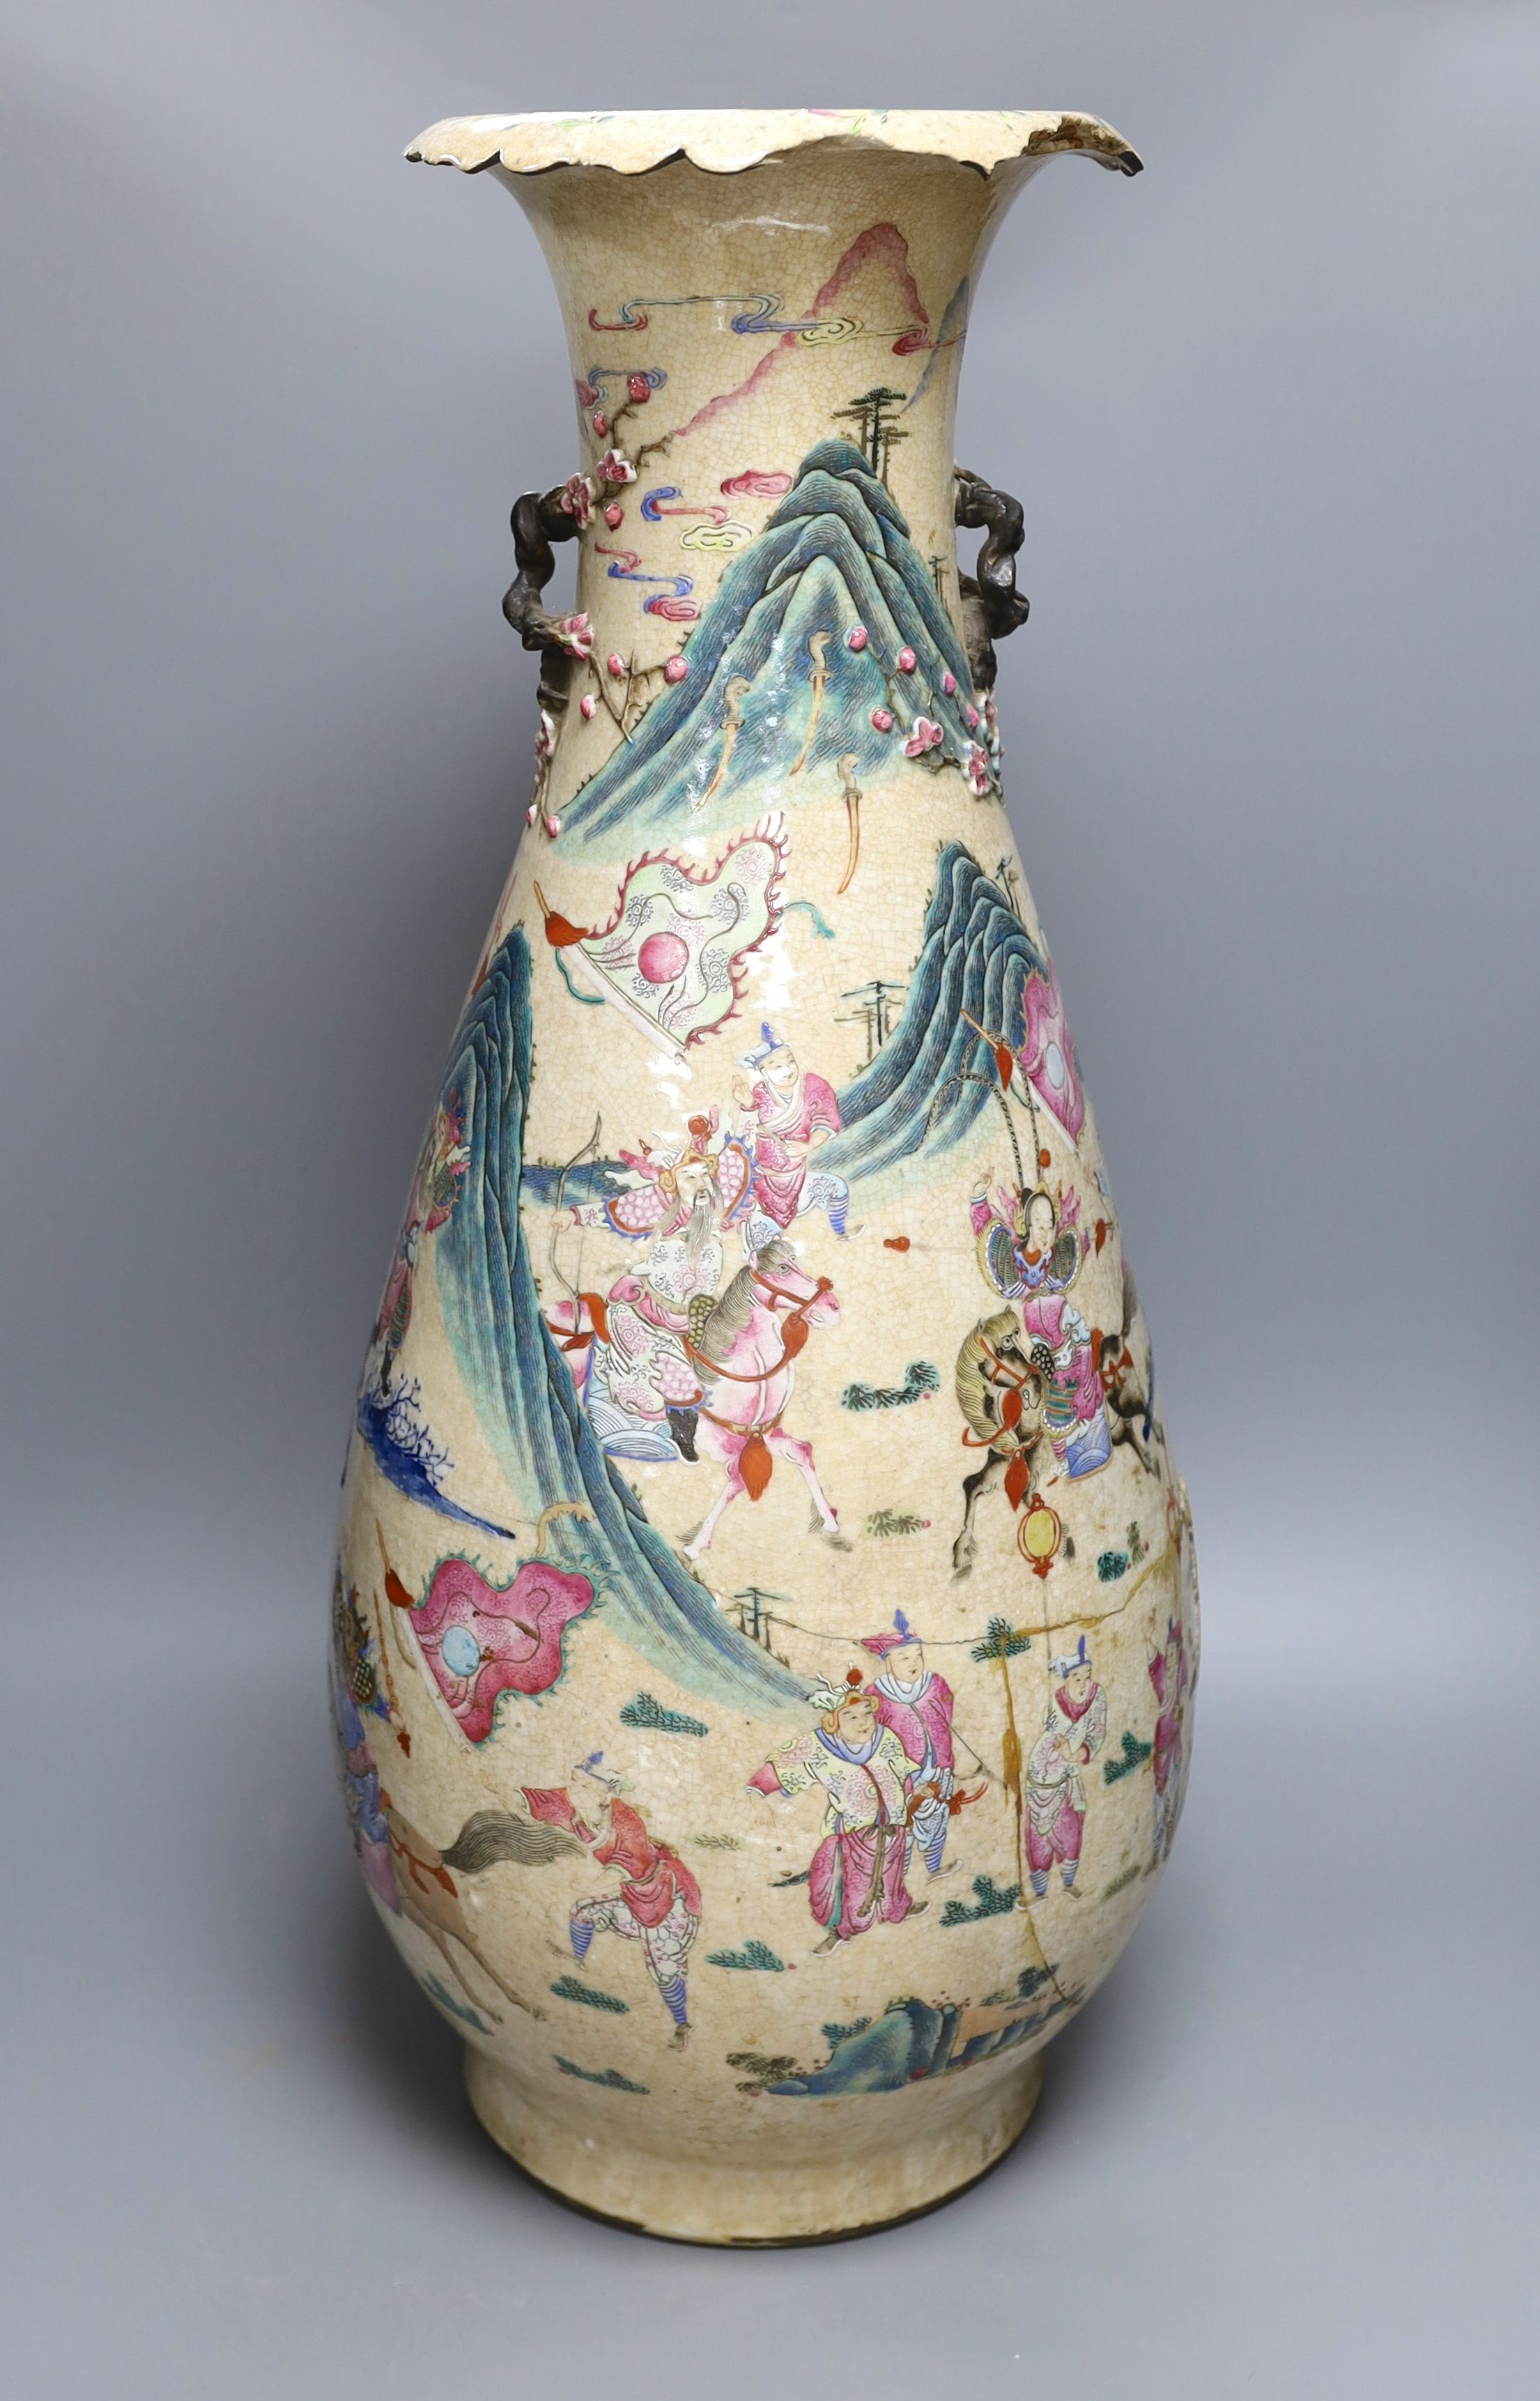 A large Chinese crackle glaze vase, Chenghua mark, 19th century - 62cm tall